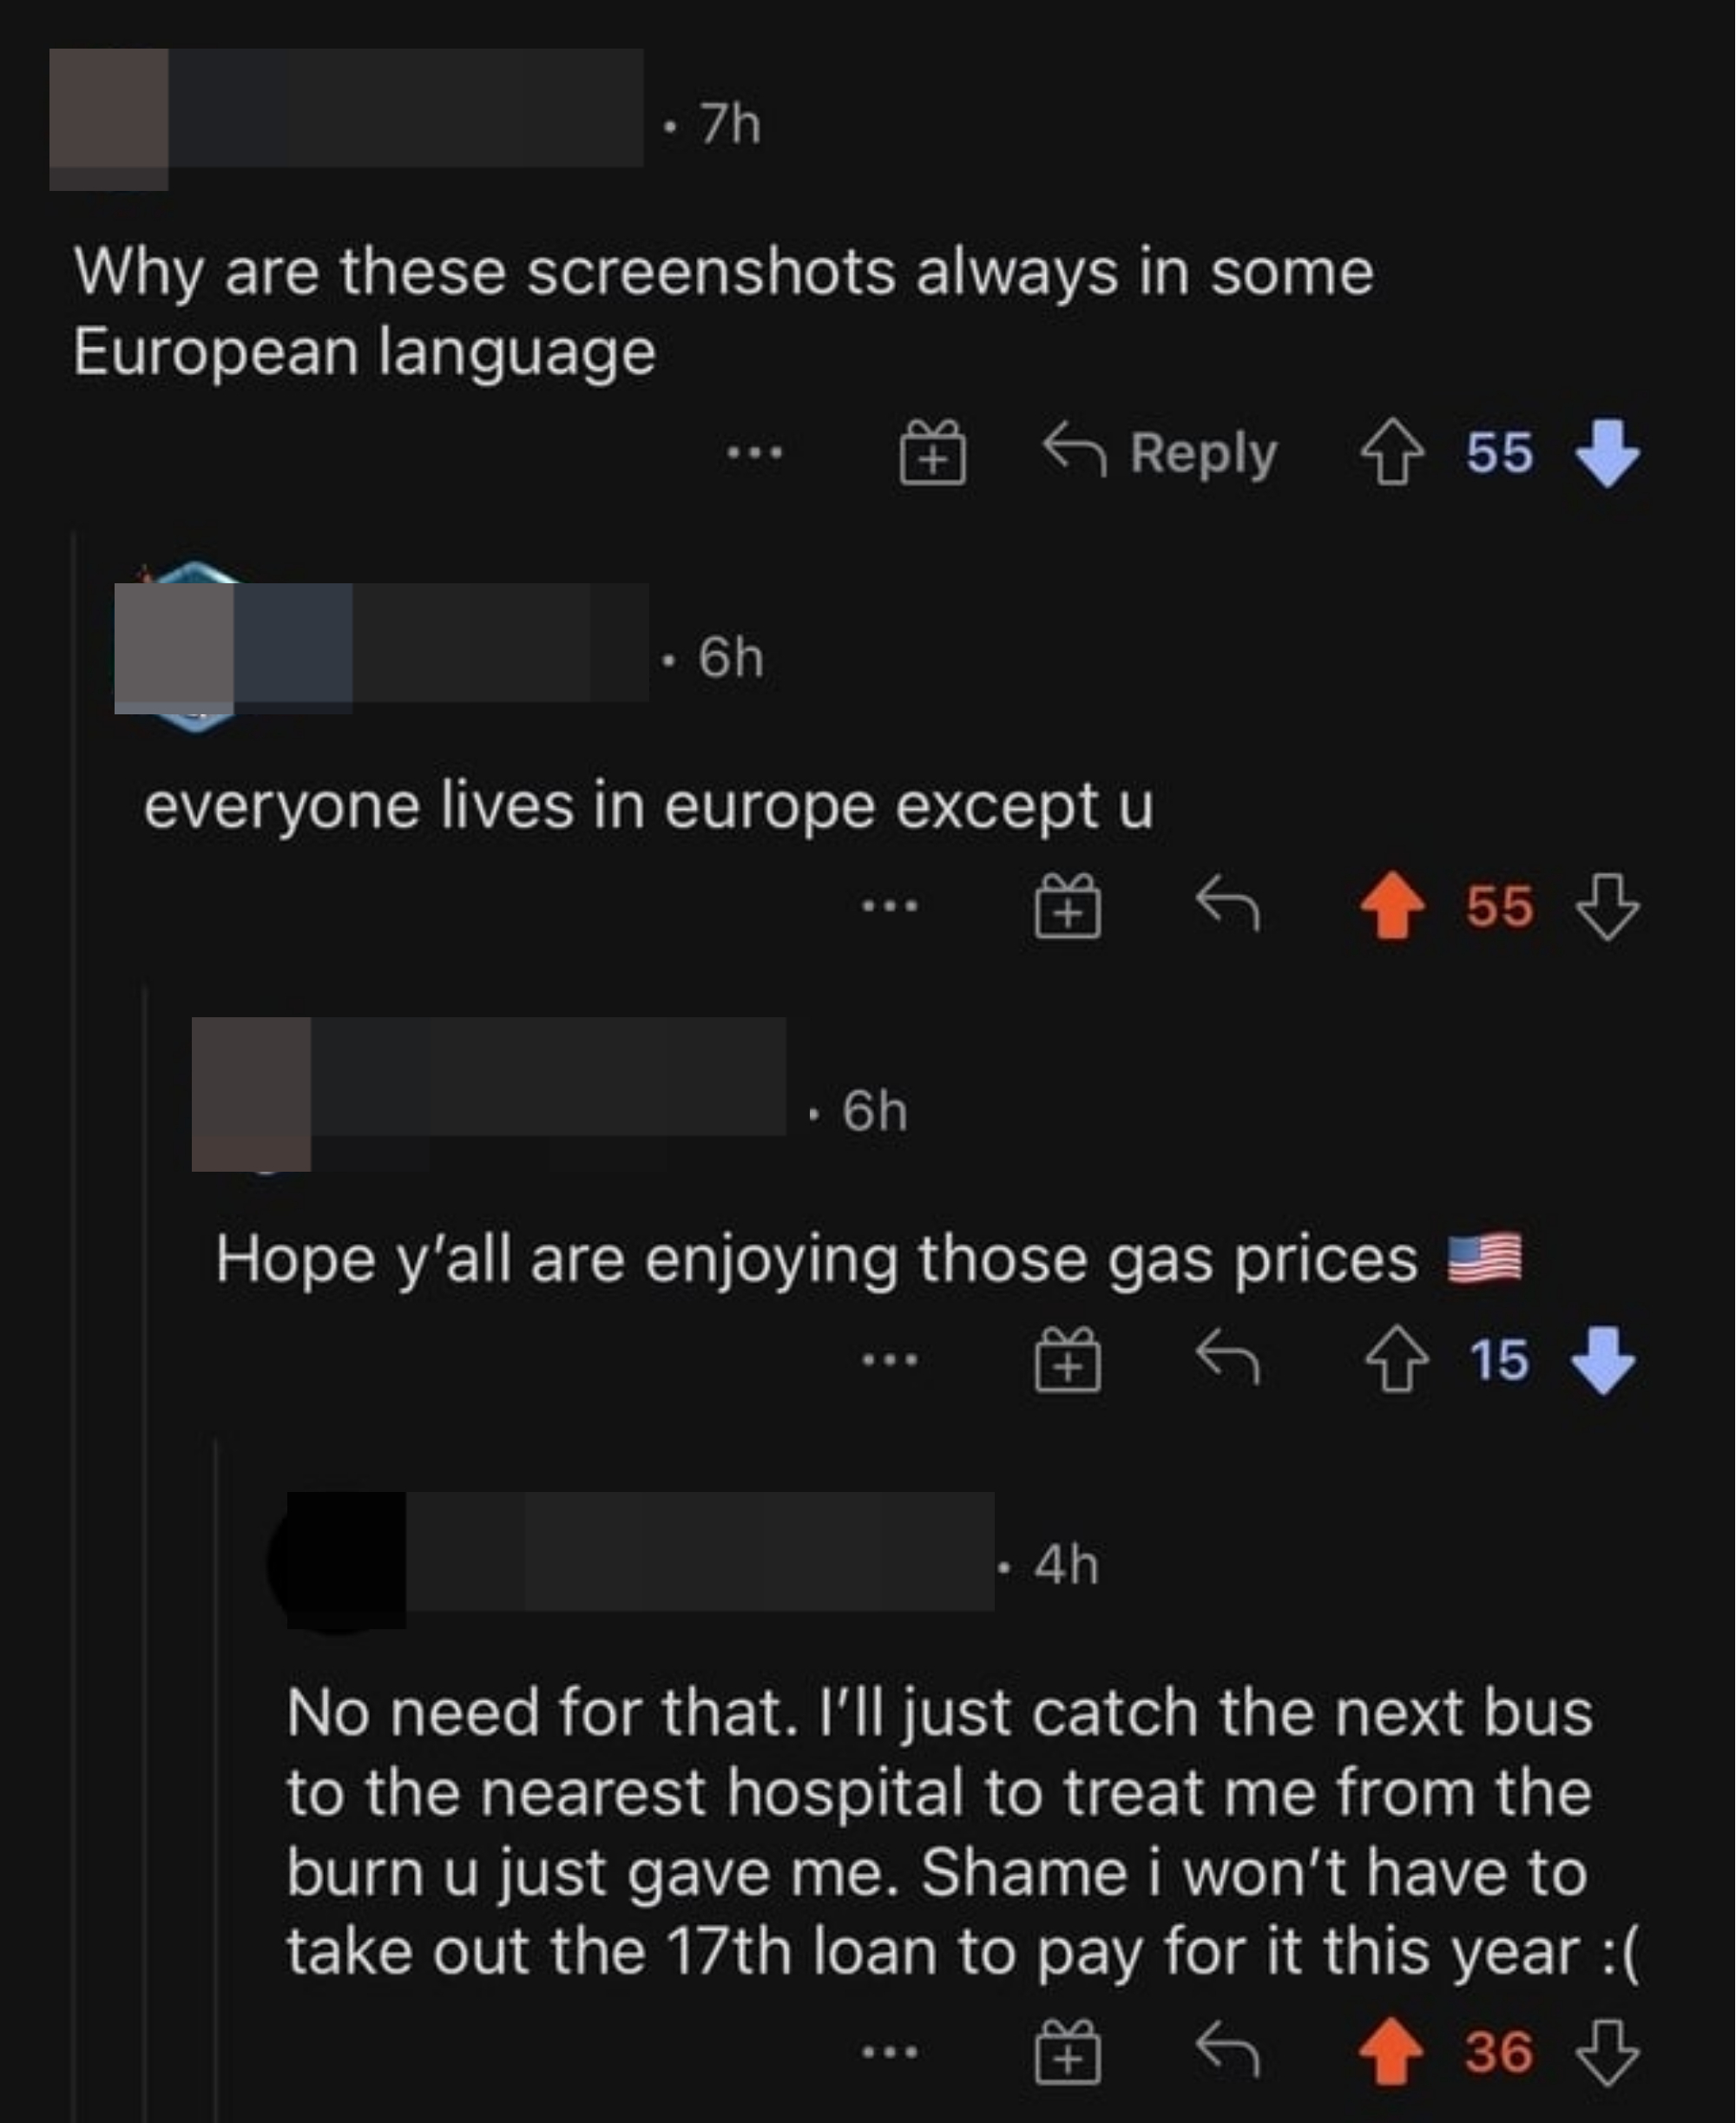 An American asks why they always see things in European languages and &quot;hope y&#x27;all are enjoying those gas prices,&quot; and a European responds that they don&#x27;t need gas because they can just take the bus to the hospital without having to take out a loan